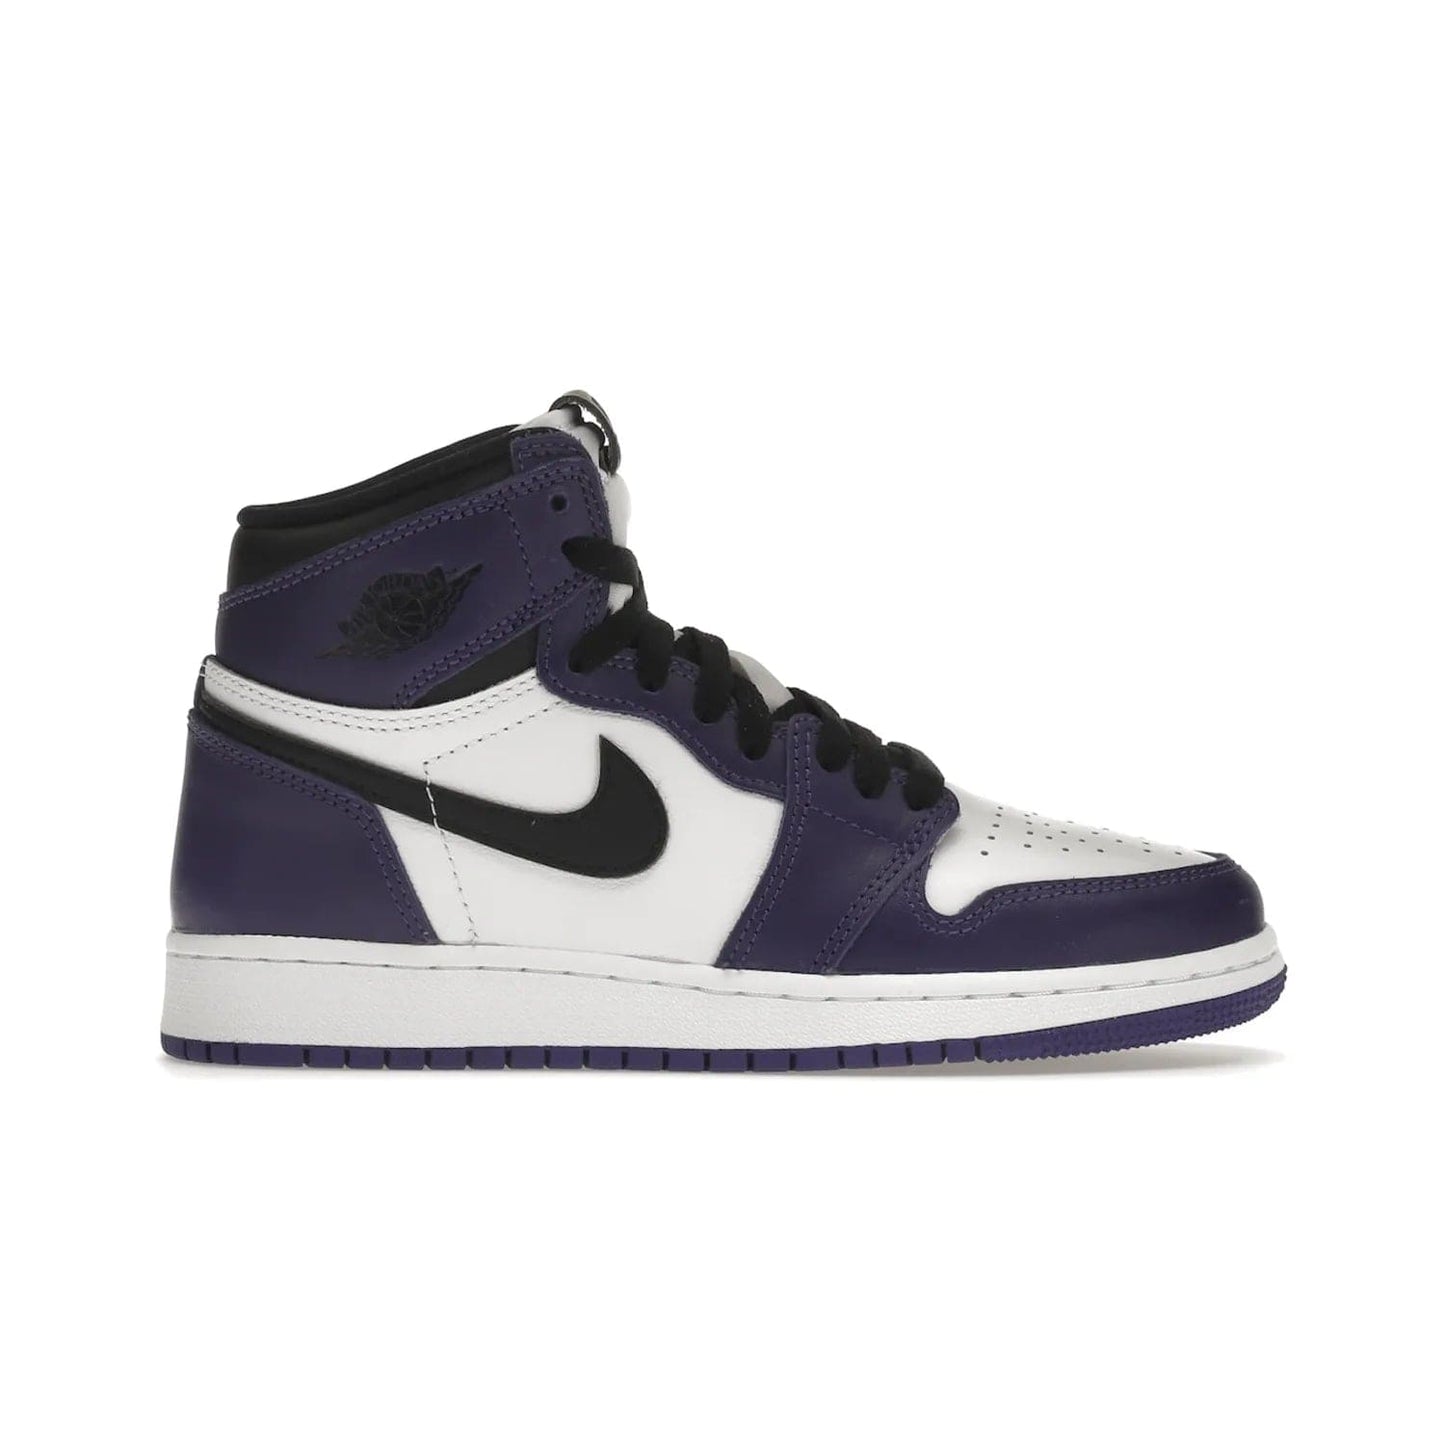 Jordan 1 Retro High Court Purple White (GS) - Image 1 - Only at www.BallersClubKickz.com - The Air Jordan 1 Retro High Court Purple is here and young sneaker heads can show off classic style. Features a white tumbled leather upper, black swoosh, purple overlays, black collar with purple overlay, white tongue, black patch with purple Nike Air logo and swoosh, white midsole, and purple rubber outsole with circular pattern.